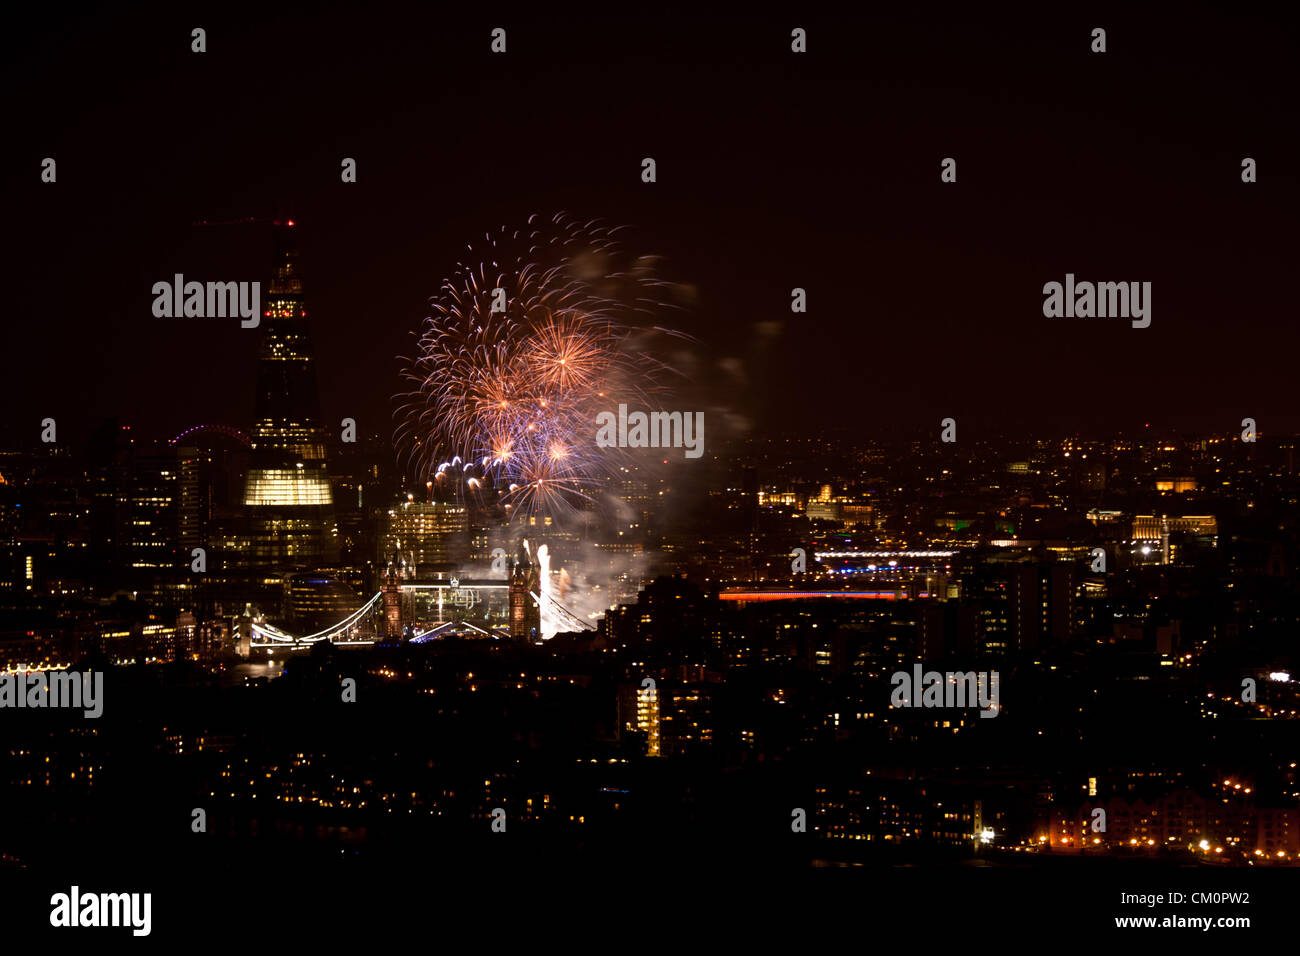 LONDON, UK, 9th Sep, 2012. Fireworks over Tower Bridge and the City celebrating the end of the 2012 Paralympics, as seen from Canary Wharf, the financial centre in London's historic docklands. Stock Photo